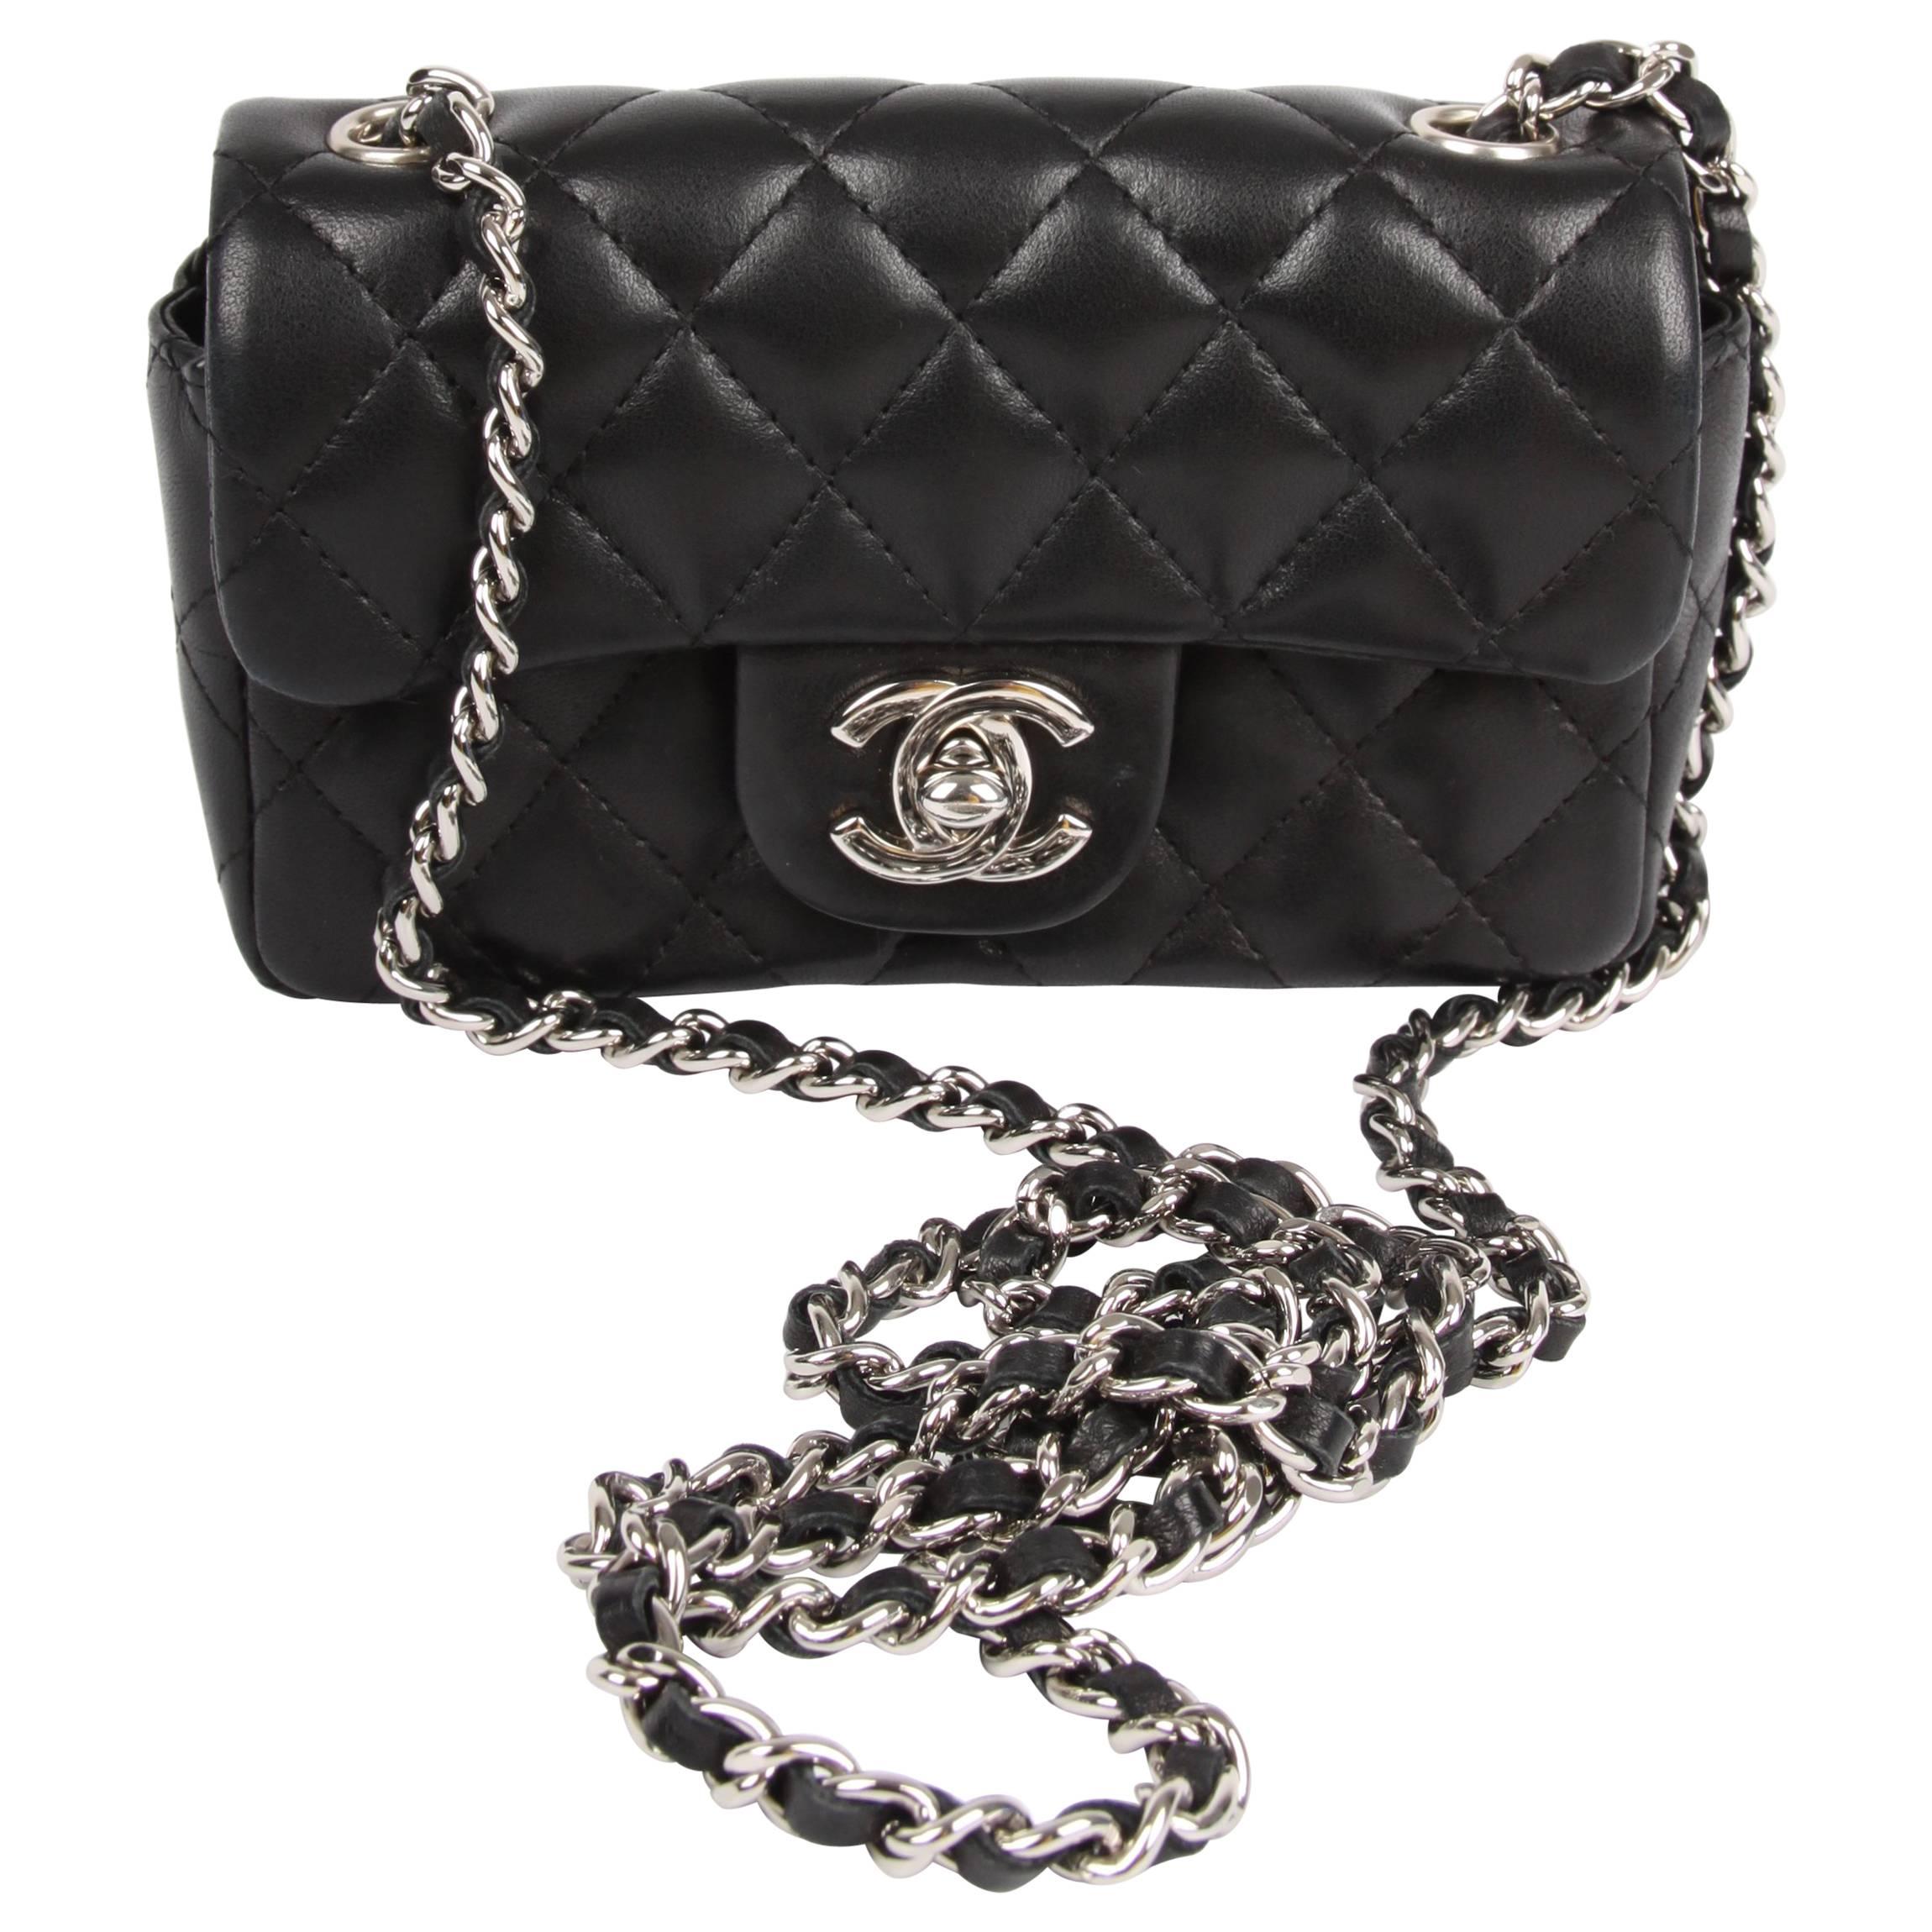 Chanel Black leather quilted Mini bag, 2005